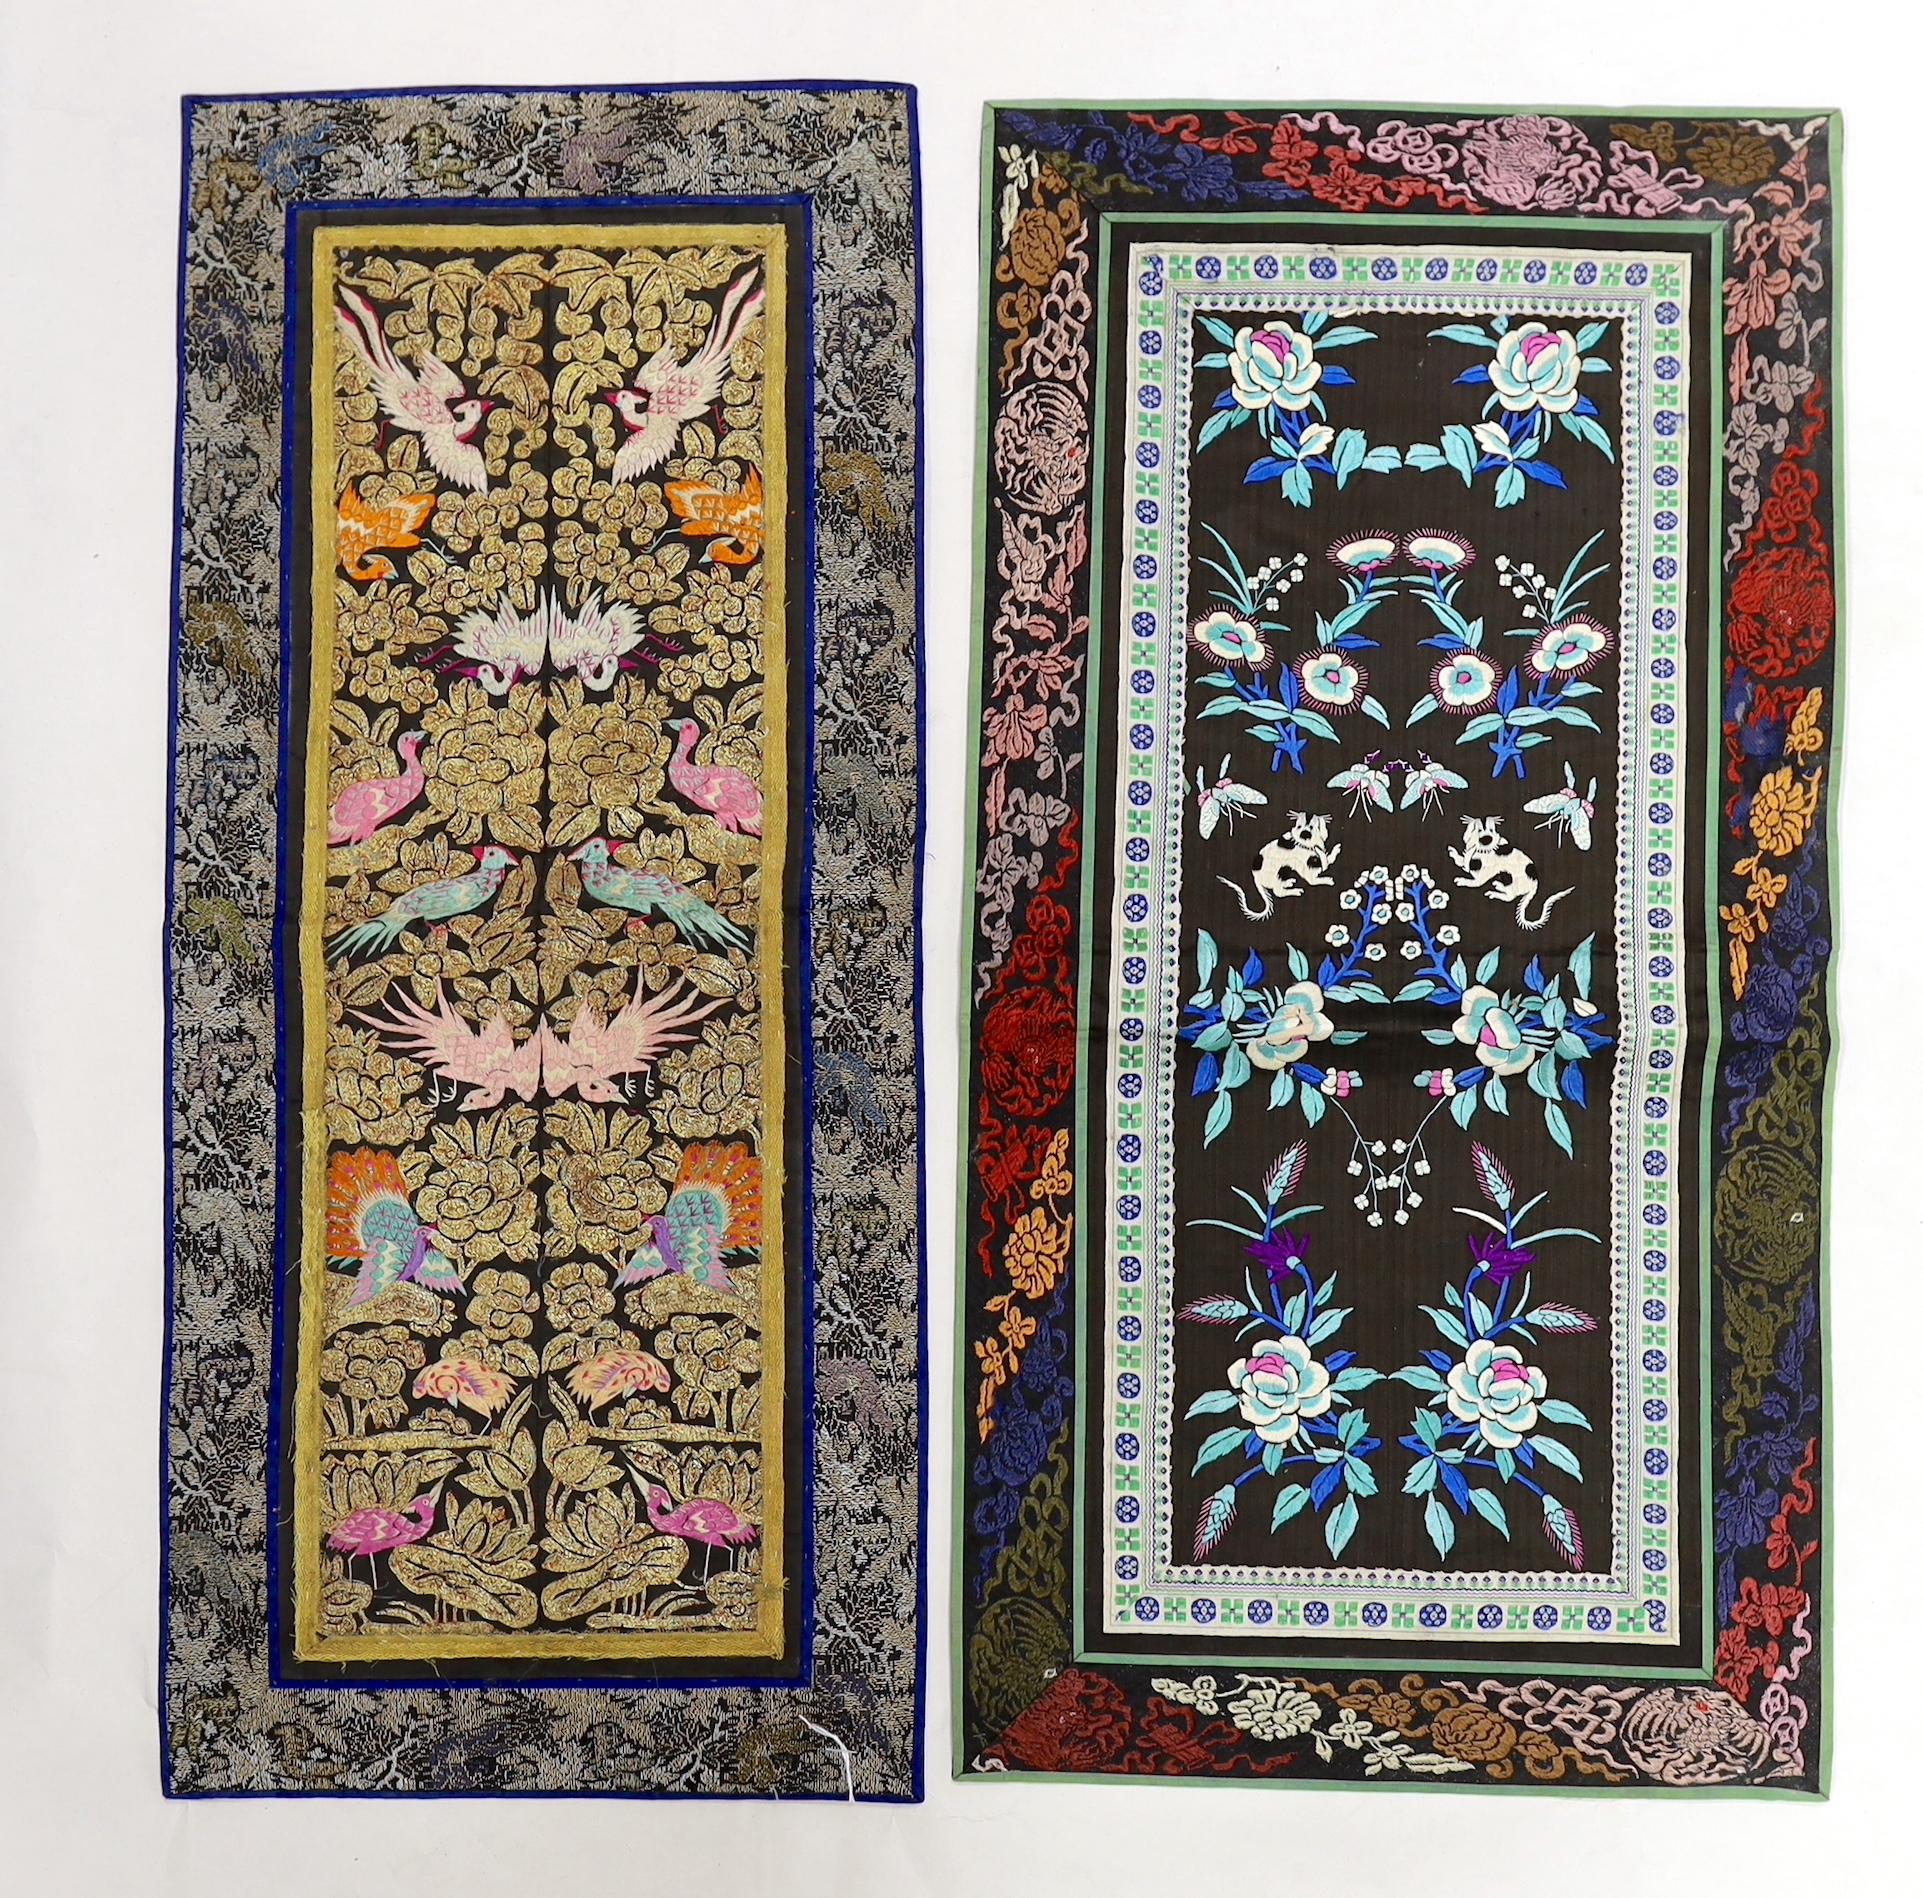 A pair of Chinese gold thread embroidered sleeve bands stitched together as an item with brocade border and a pair of polychrome embroidered sleeve bands with cats, butterflies and flowers also with brocade borders, long